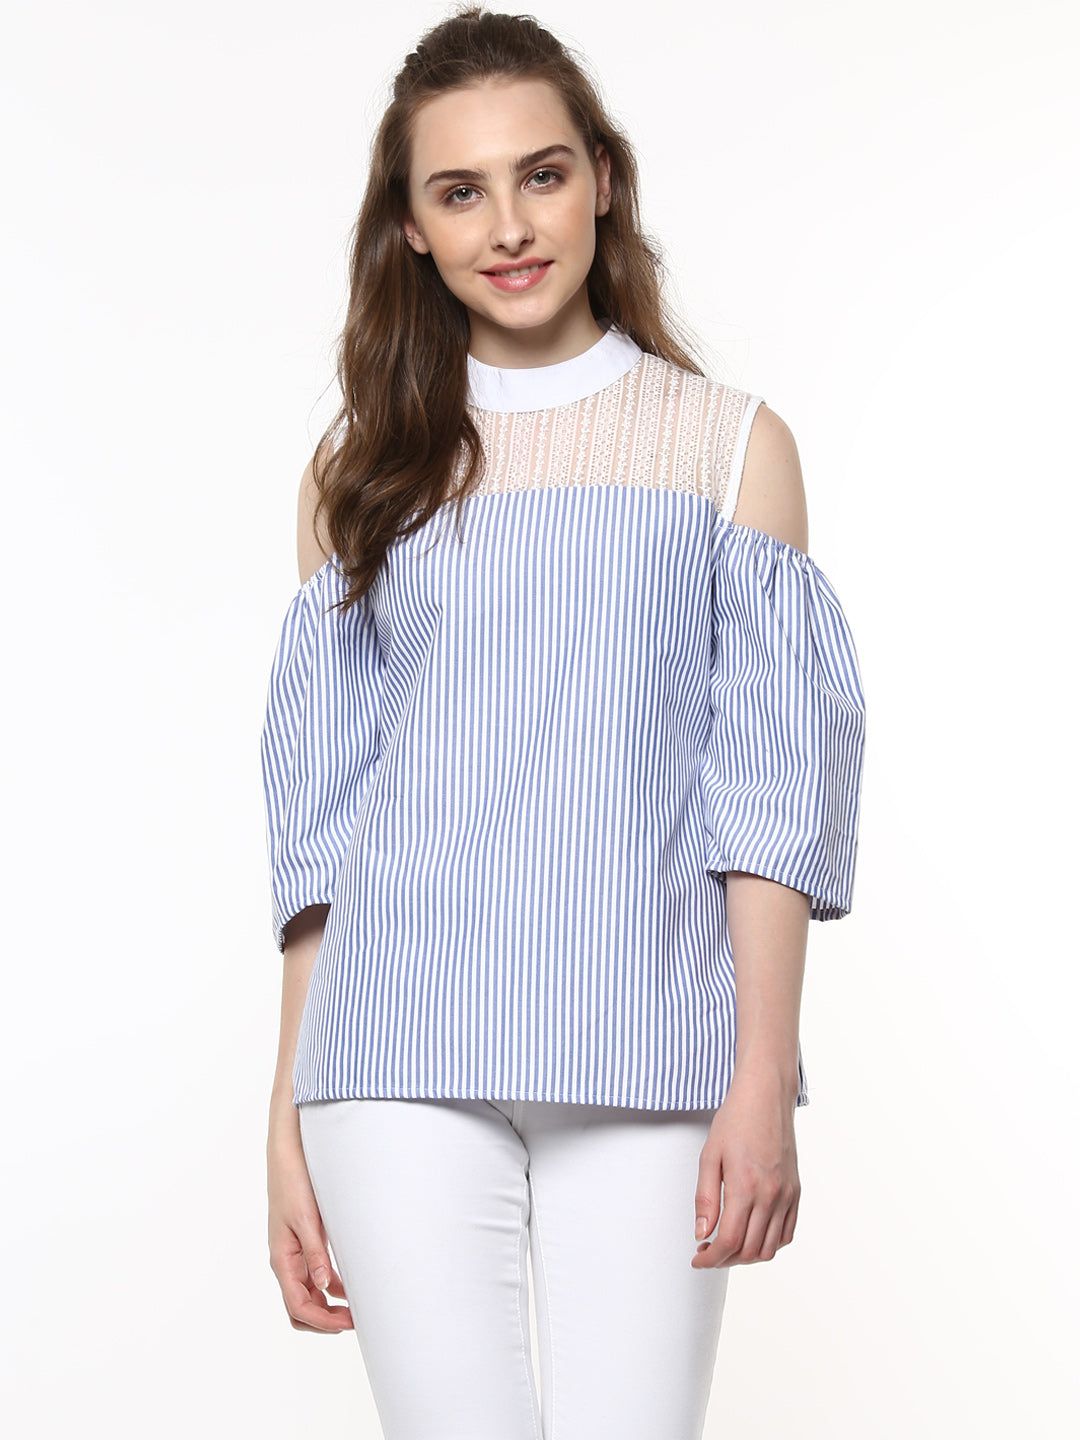 Women's Blue and White Stripe top with Lace detailing - StyleStone